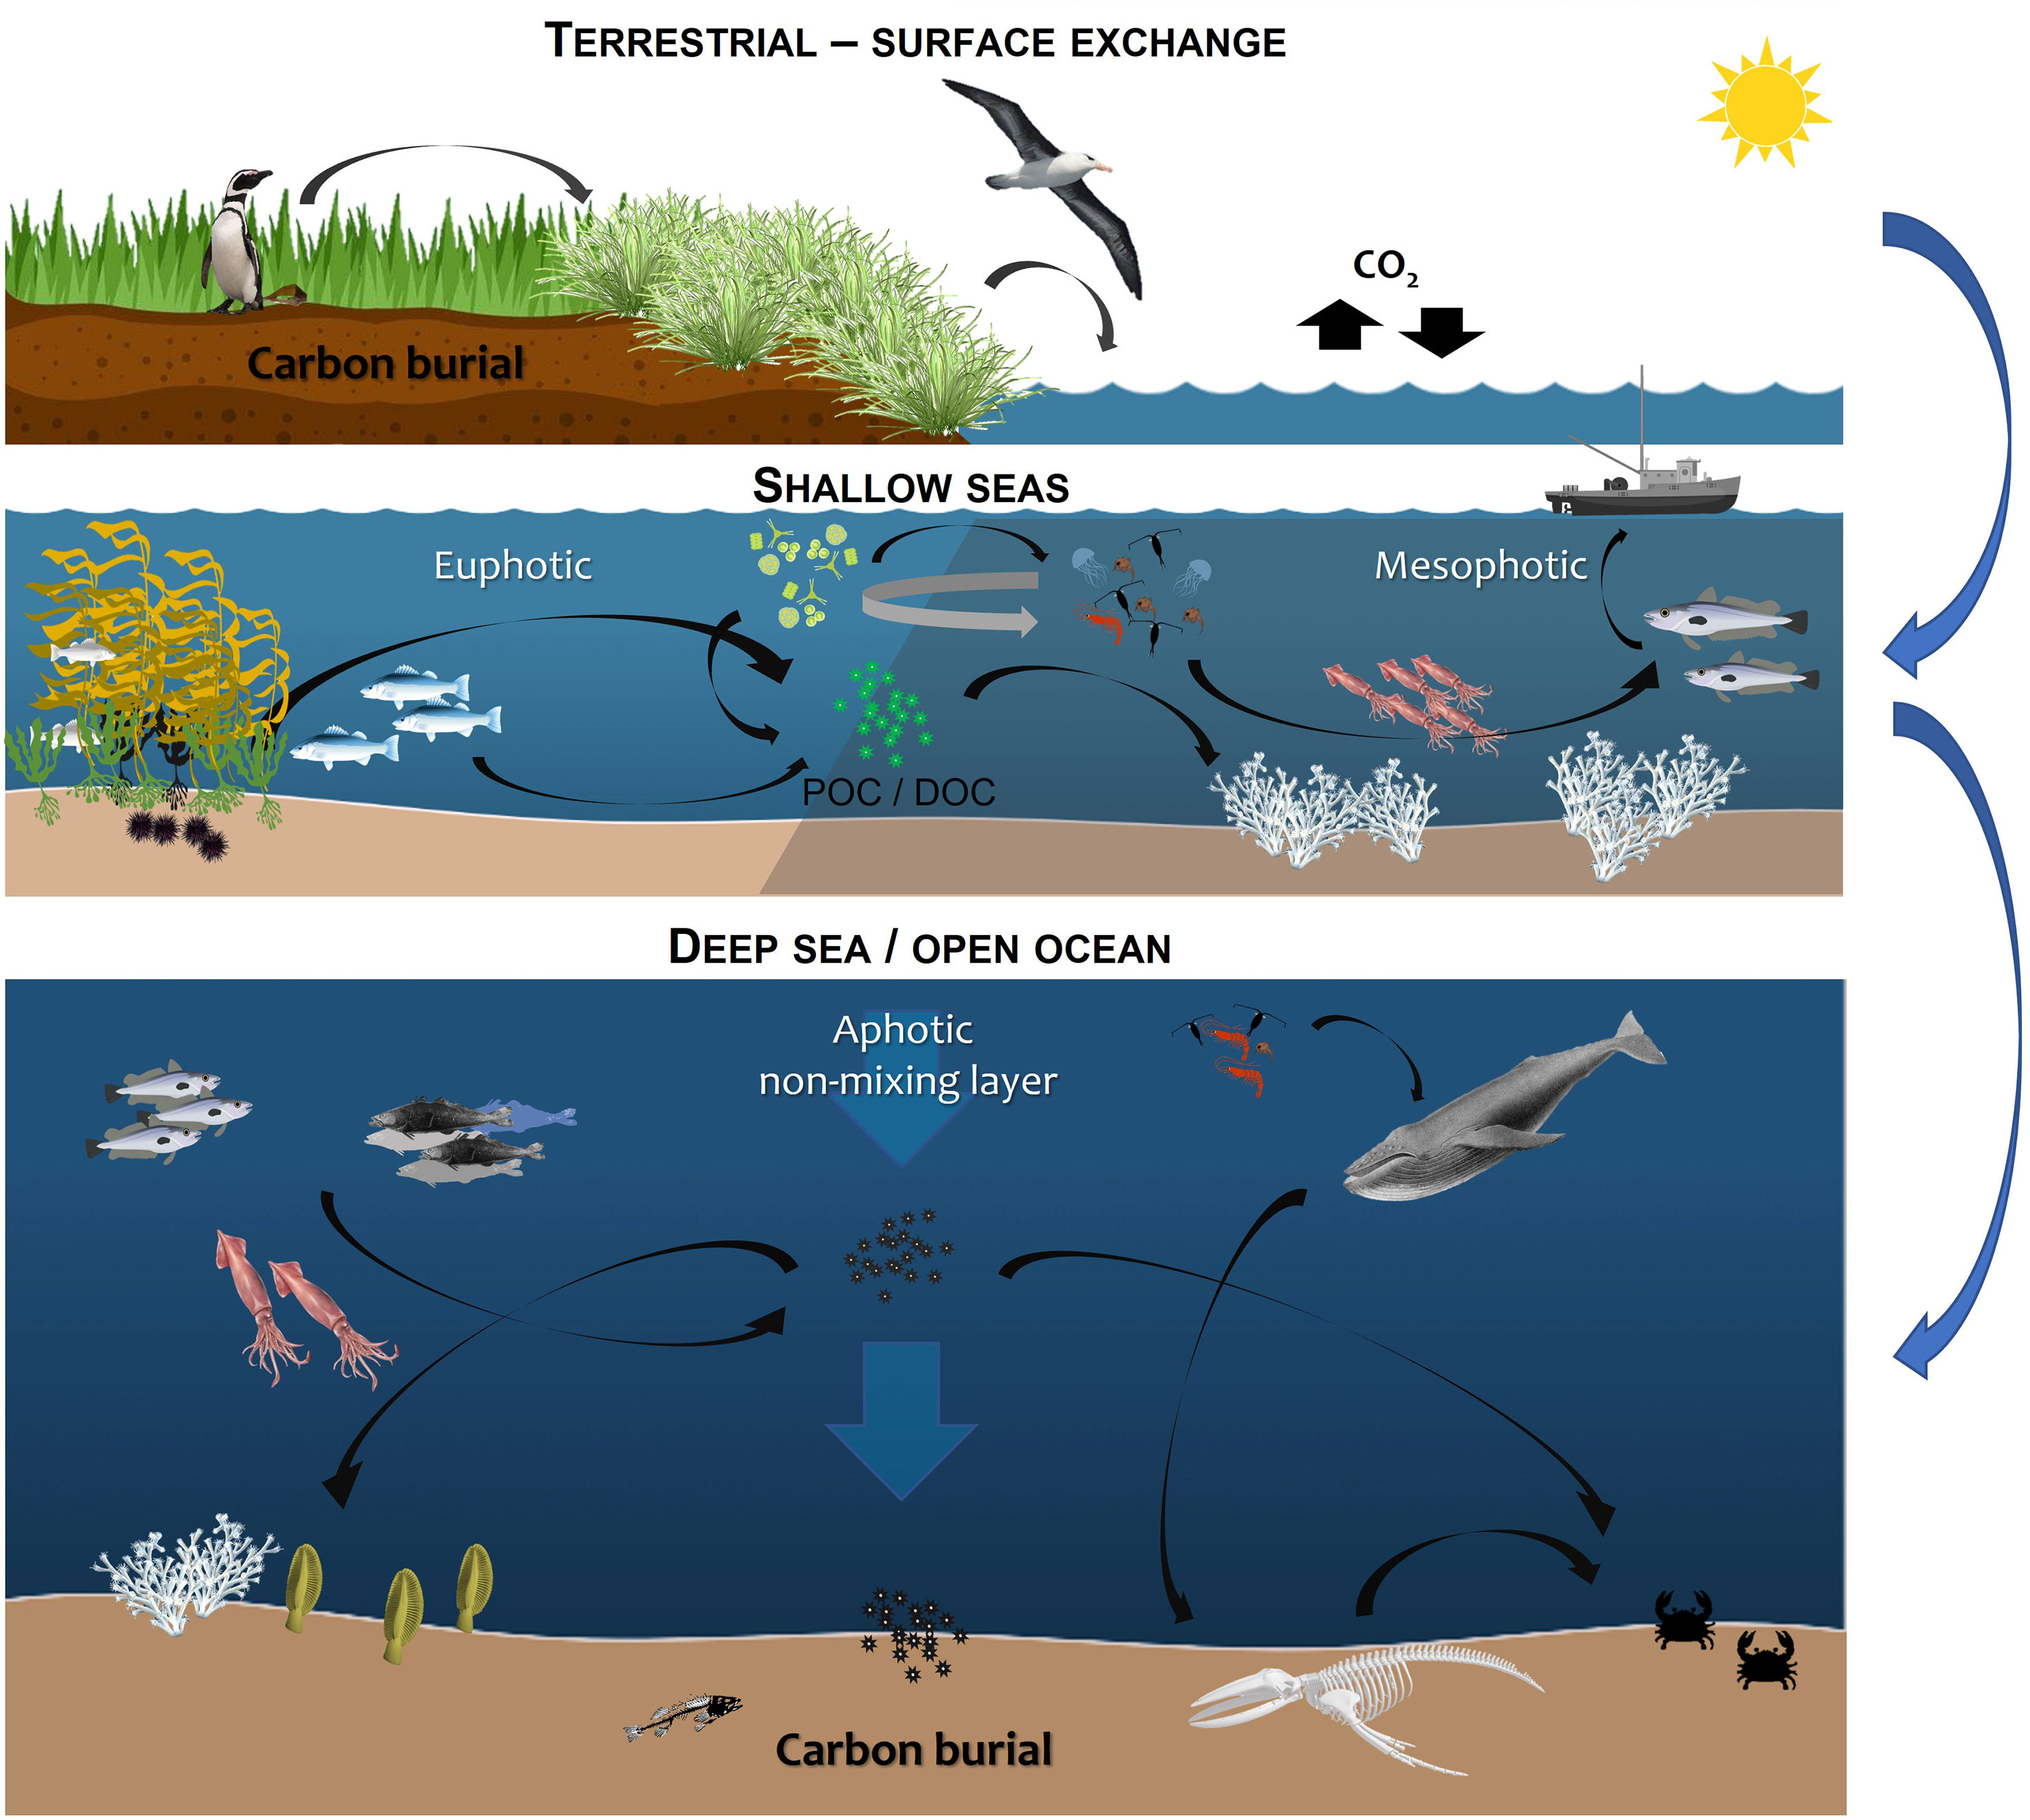 Seagrasses store more blue carbon than previously thought